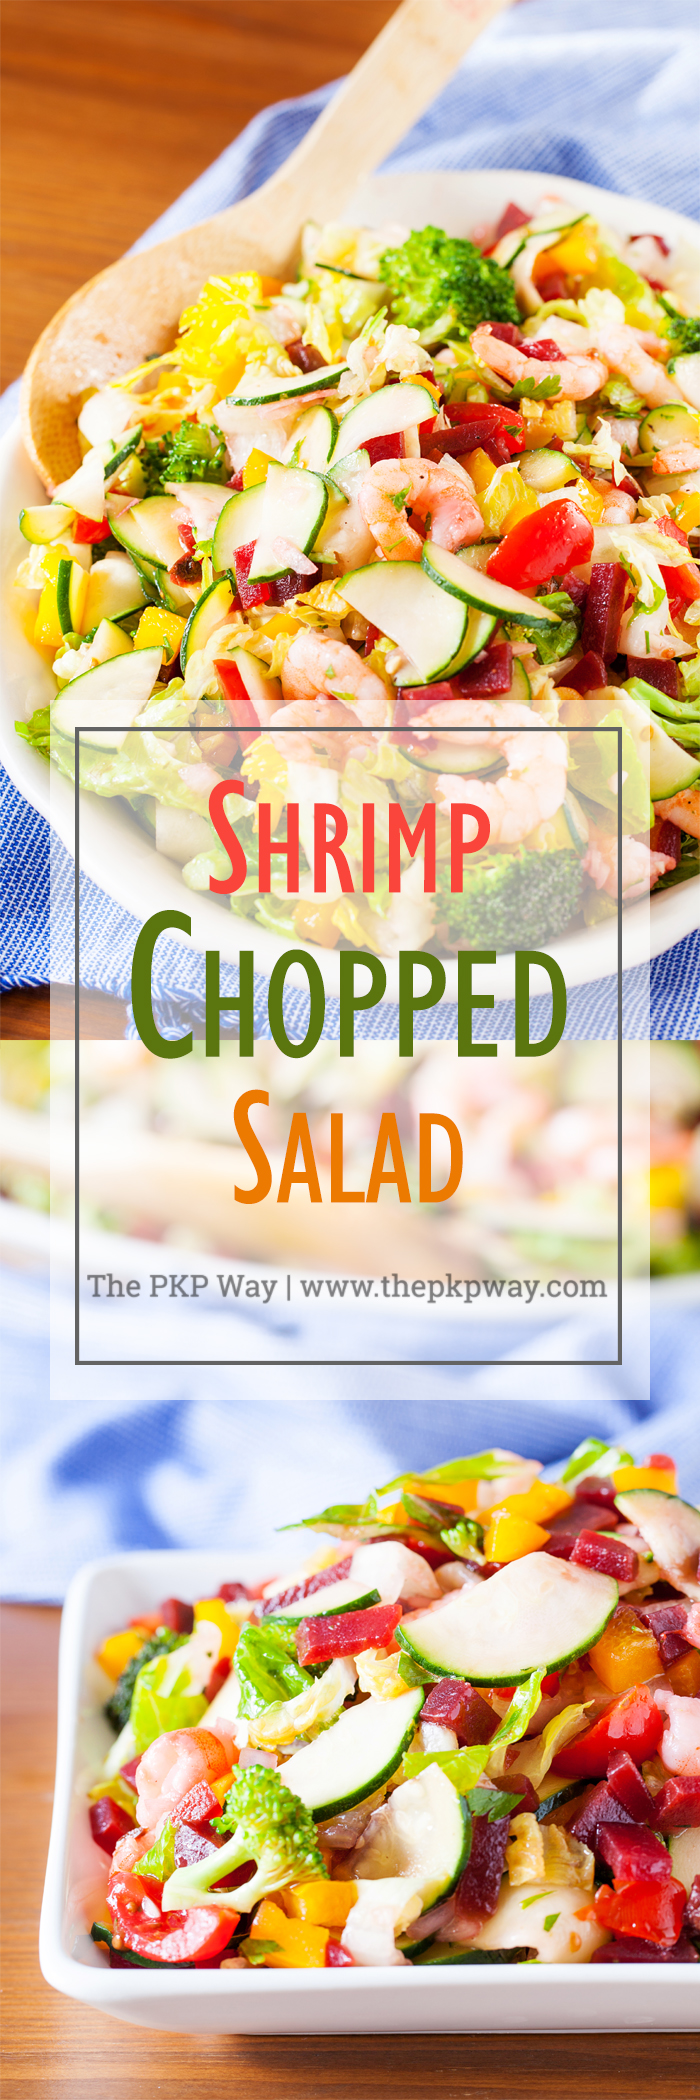 This shrimp chopped salad has it all. Plump and tender shrimp, a colorful medley of fresh veggies, and a bright and acidic dressing. Perfect as an accompaniment or a stand-alone meal.